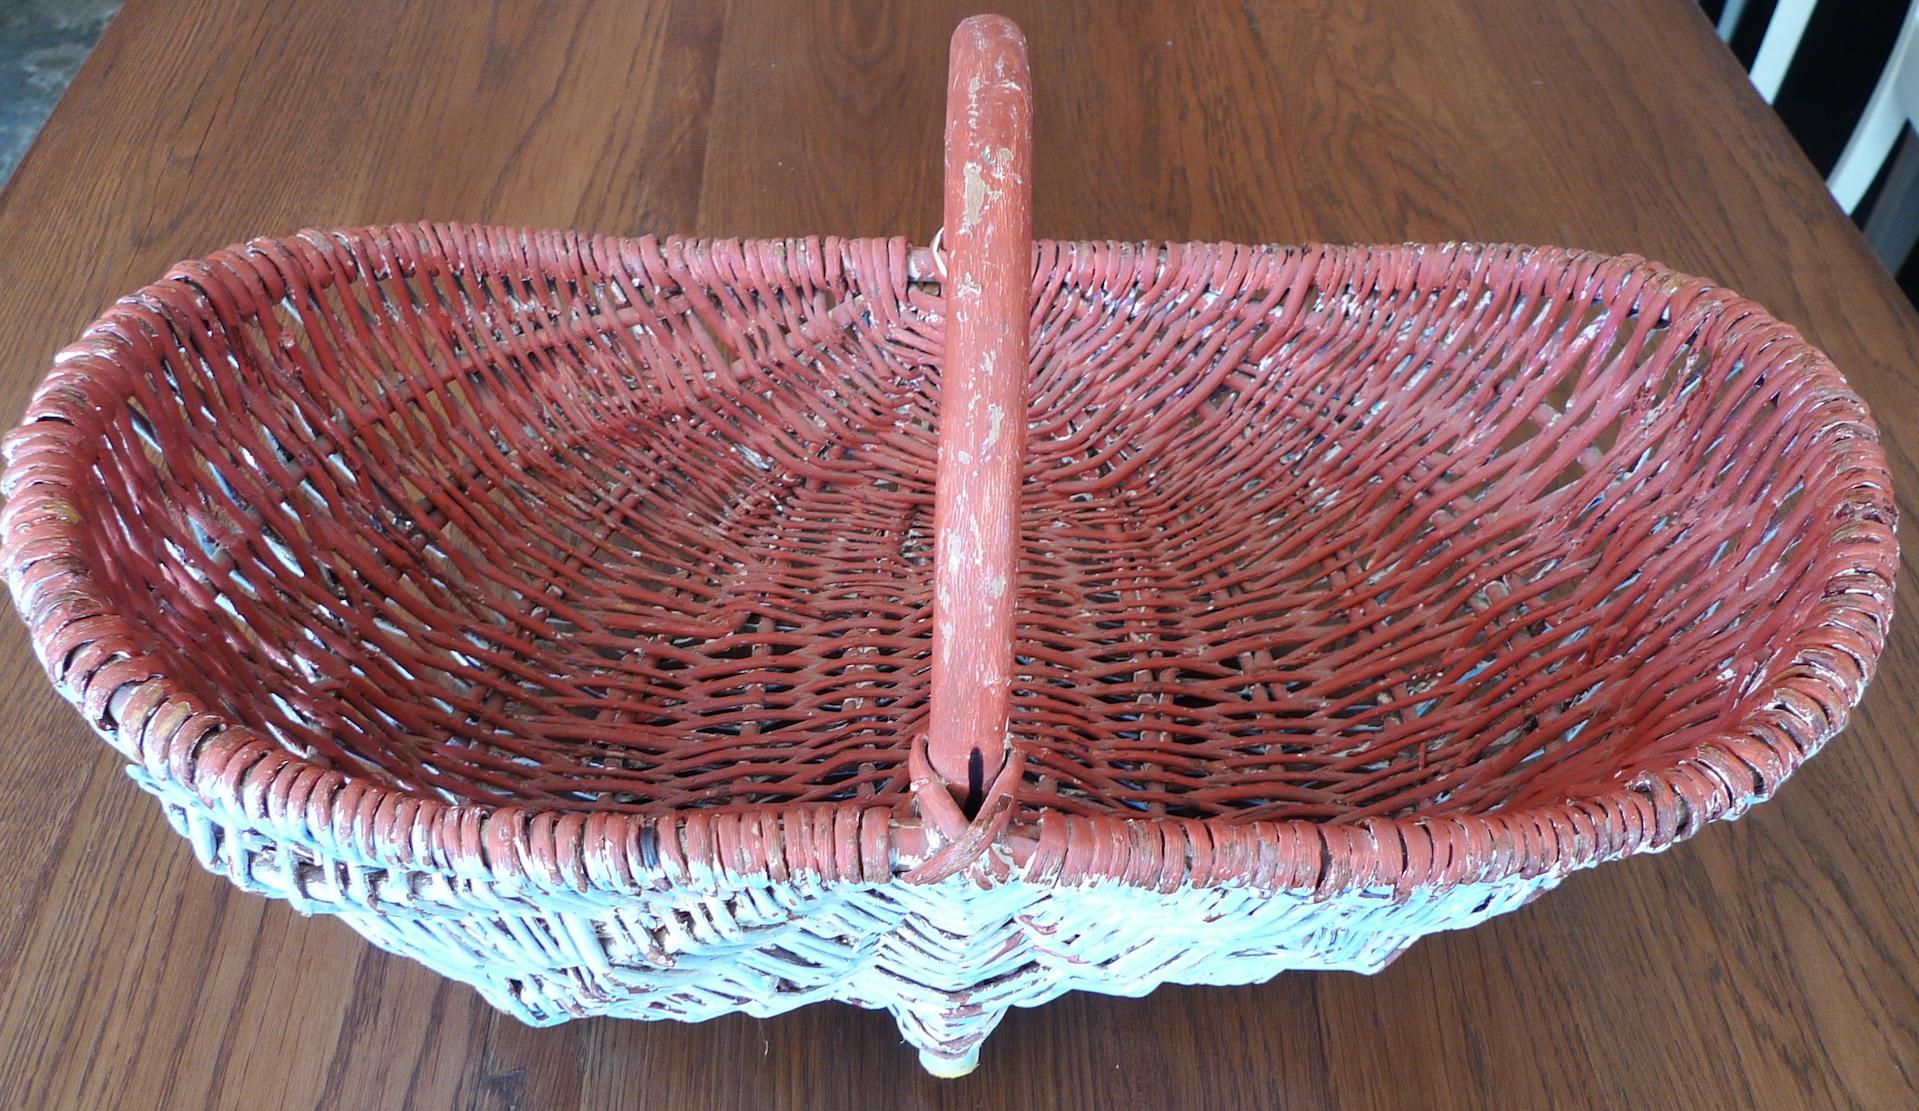 Hand-Painted French 19th Century Painted Fruit and Vegetable Wicker Basket with Handle